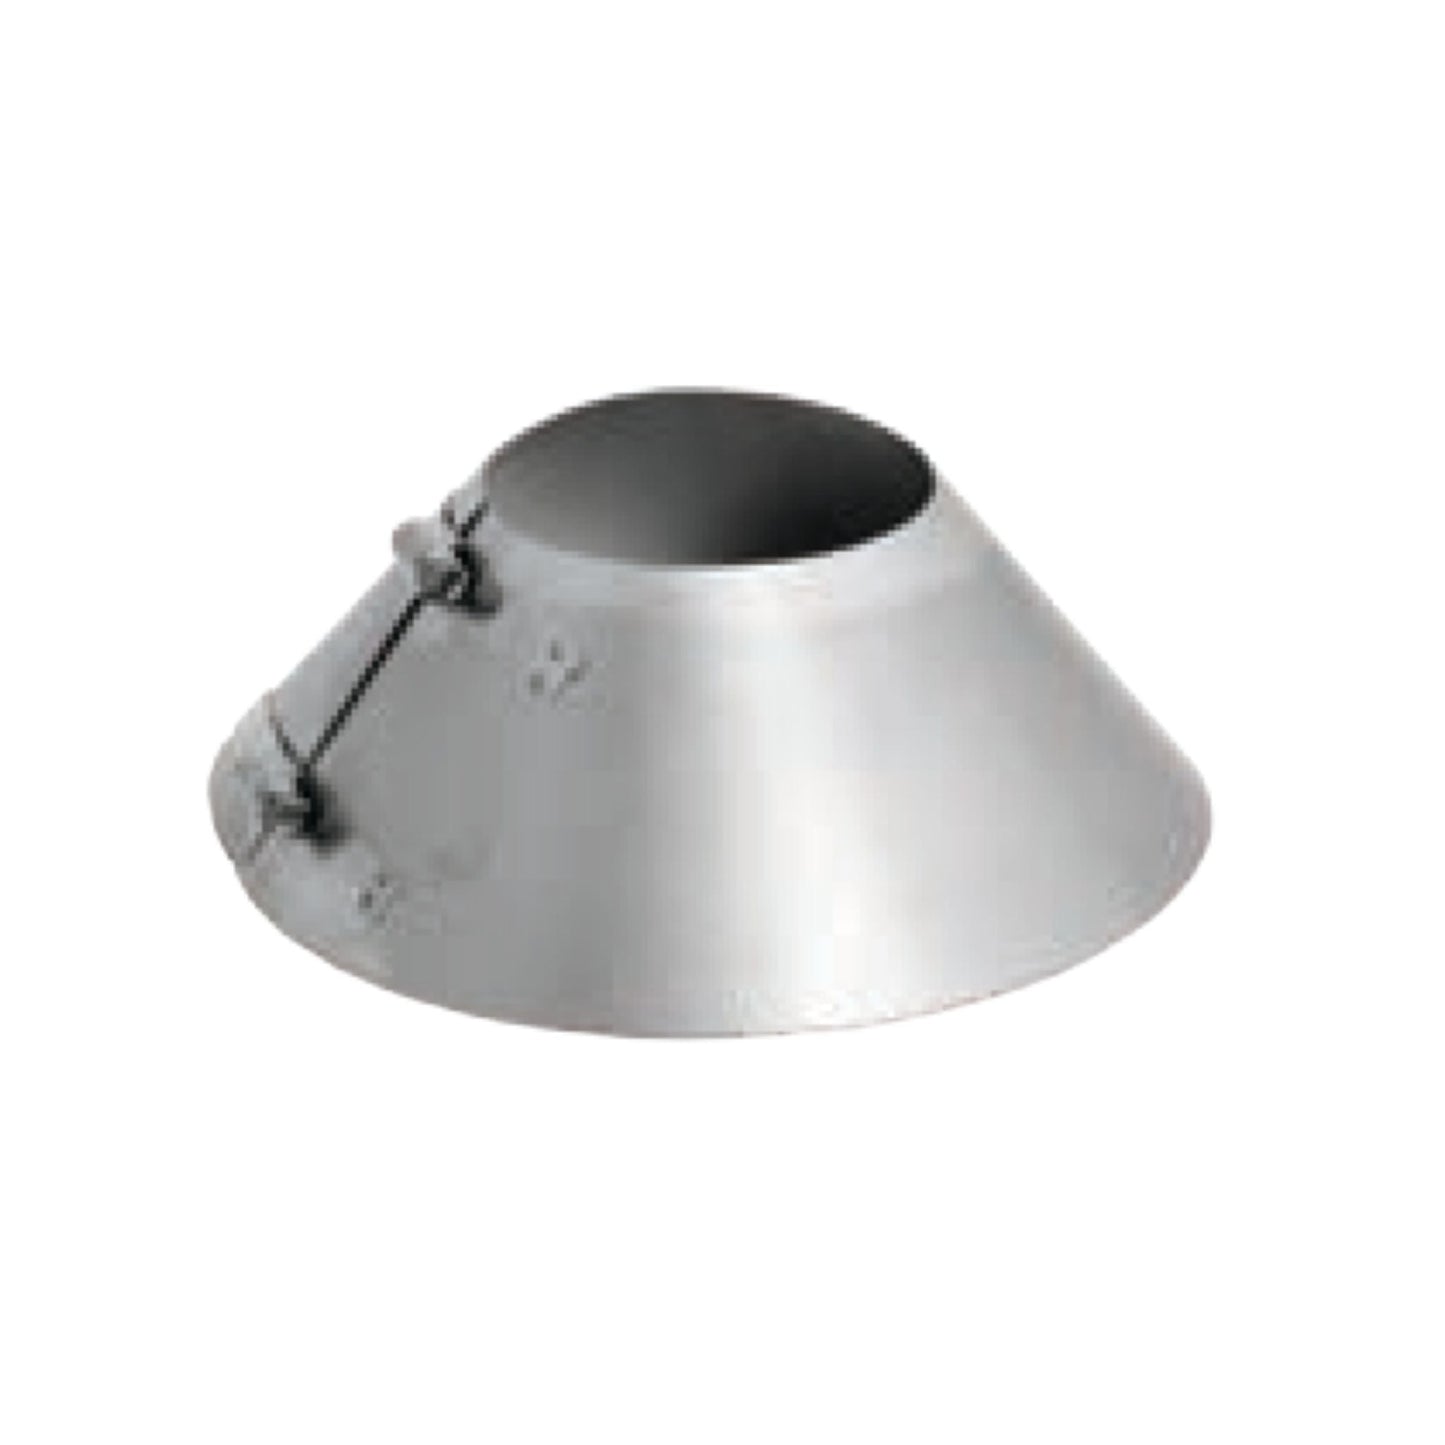 DuraVent FasNSeal 6" 29-4C Stainless Steel Storm Collar